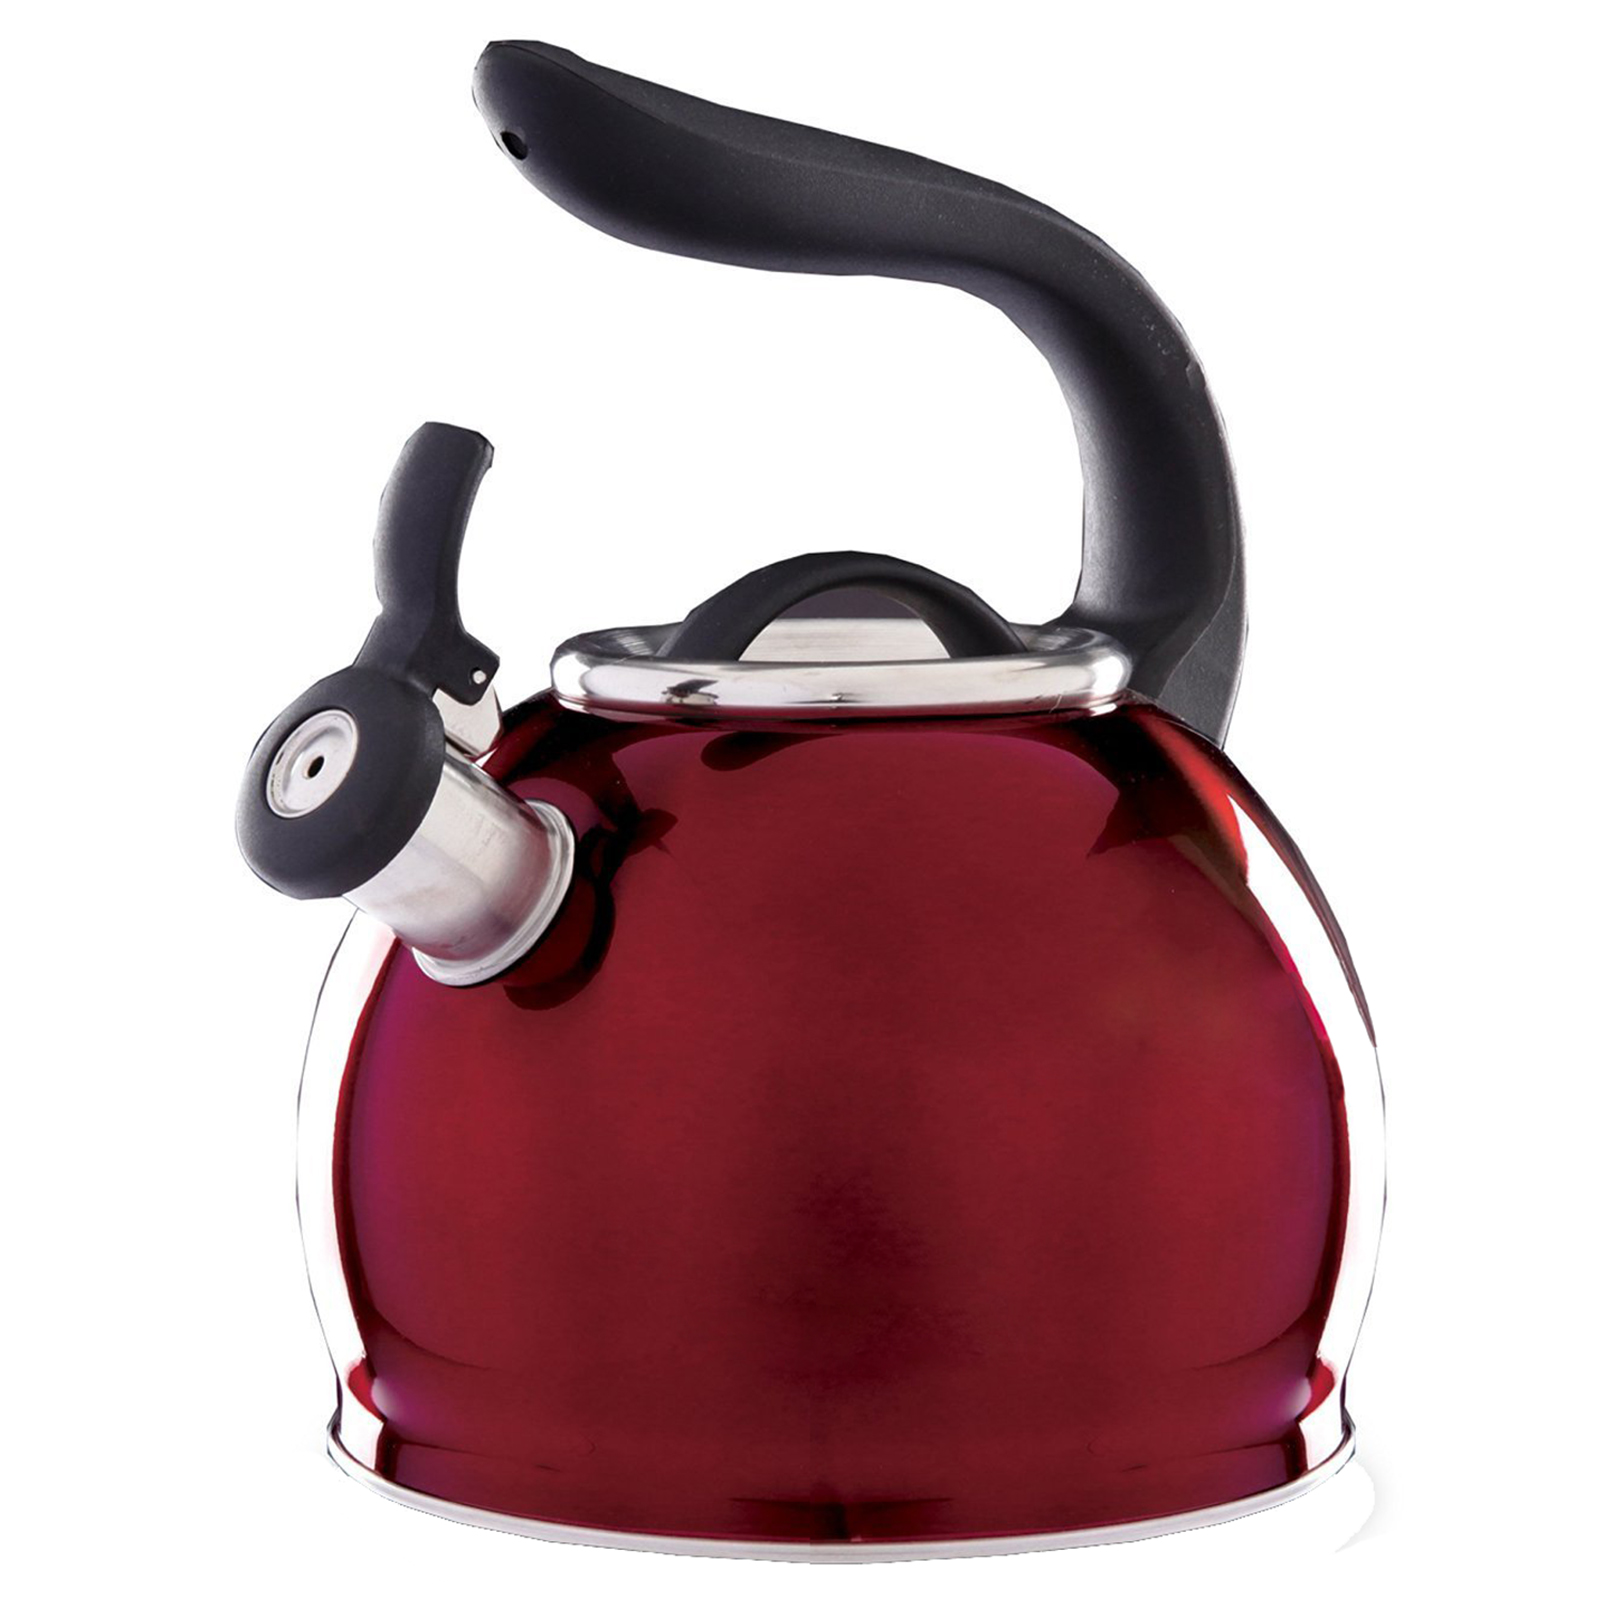 Mr. Coffee 97098604M Whistle Shine Stainless Steel Tea Kettle, 2.1 ...